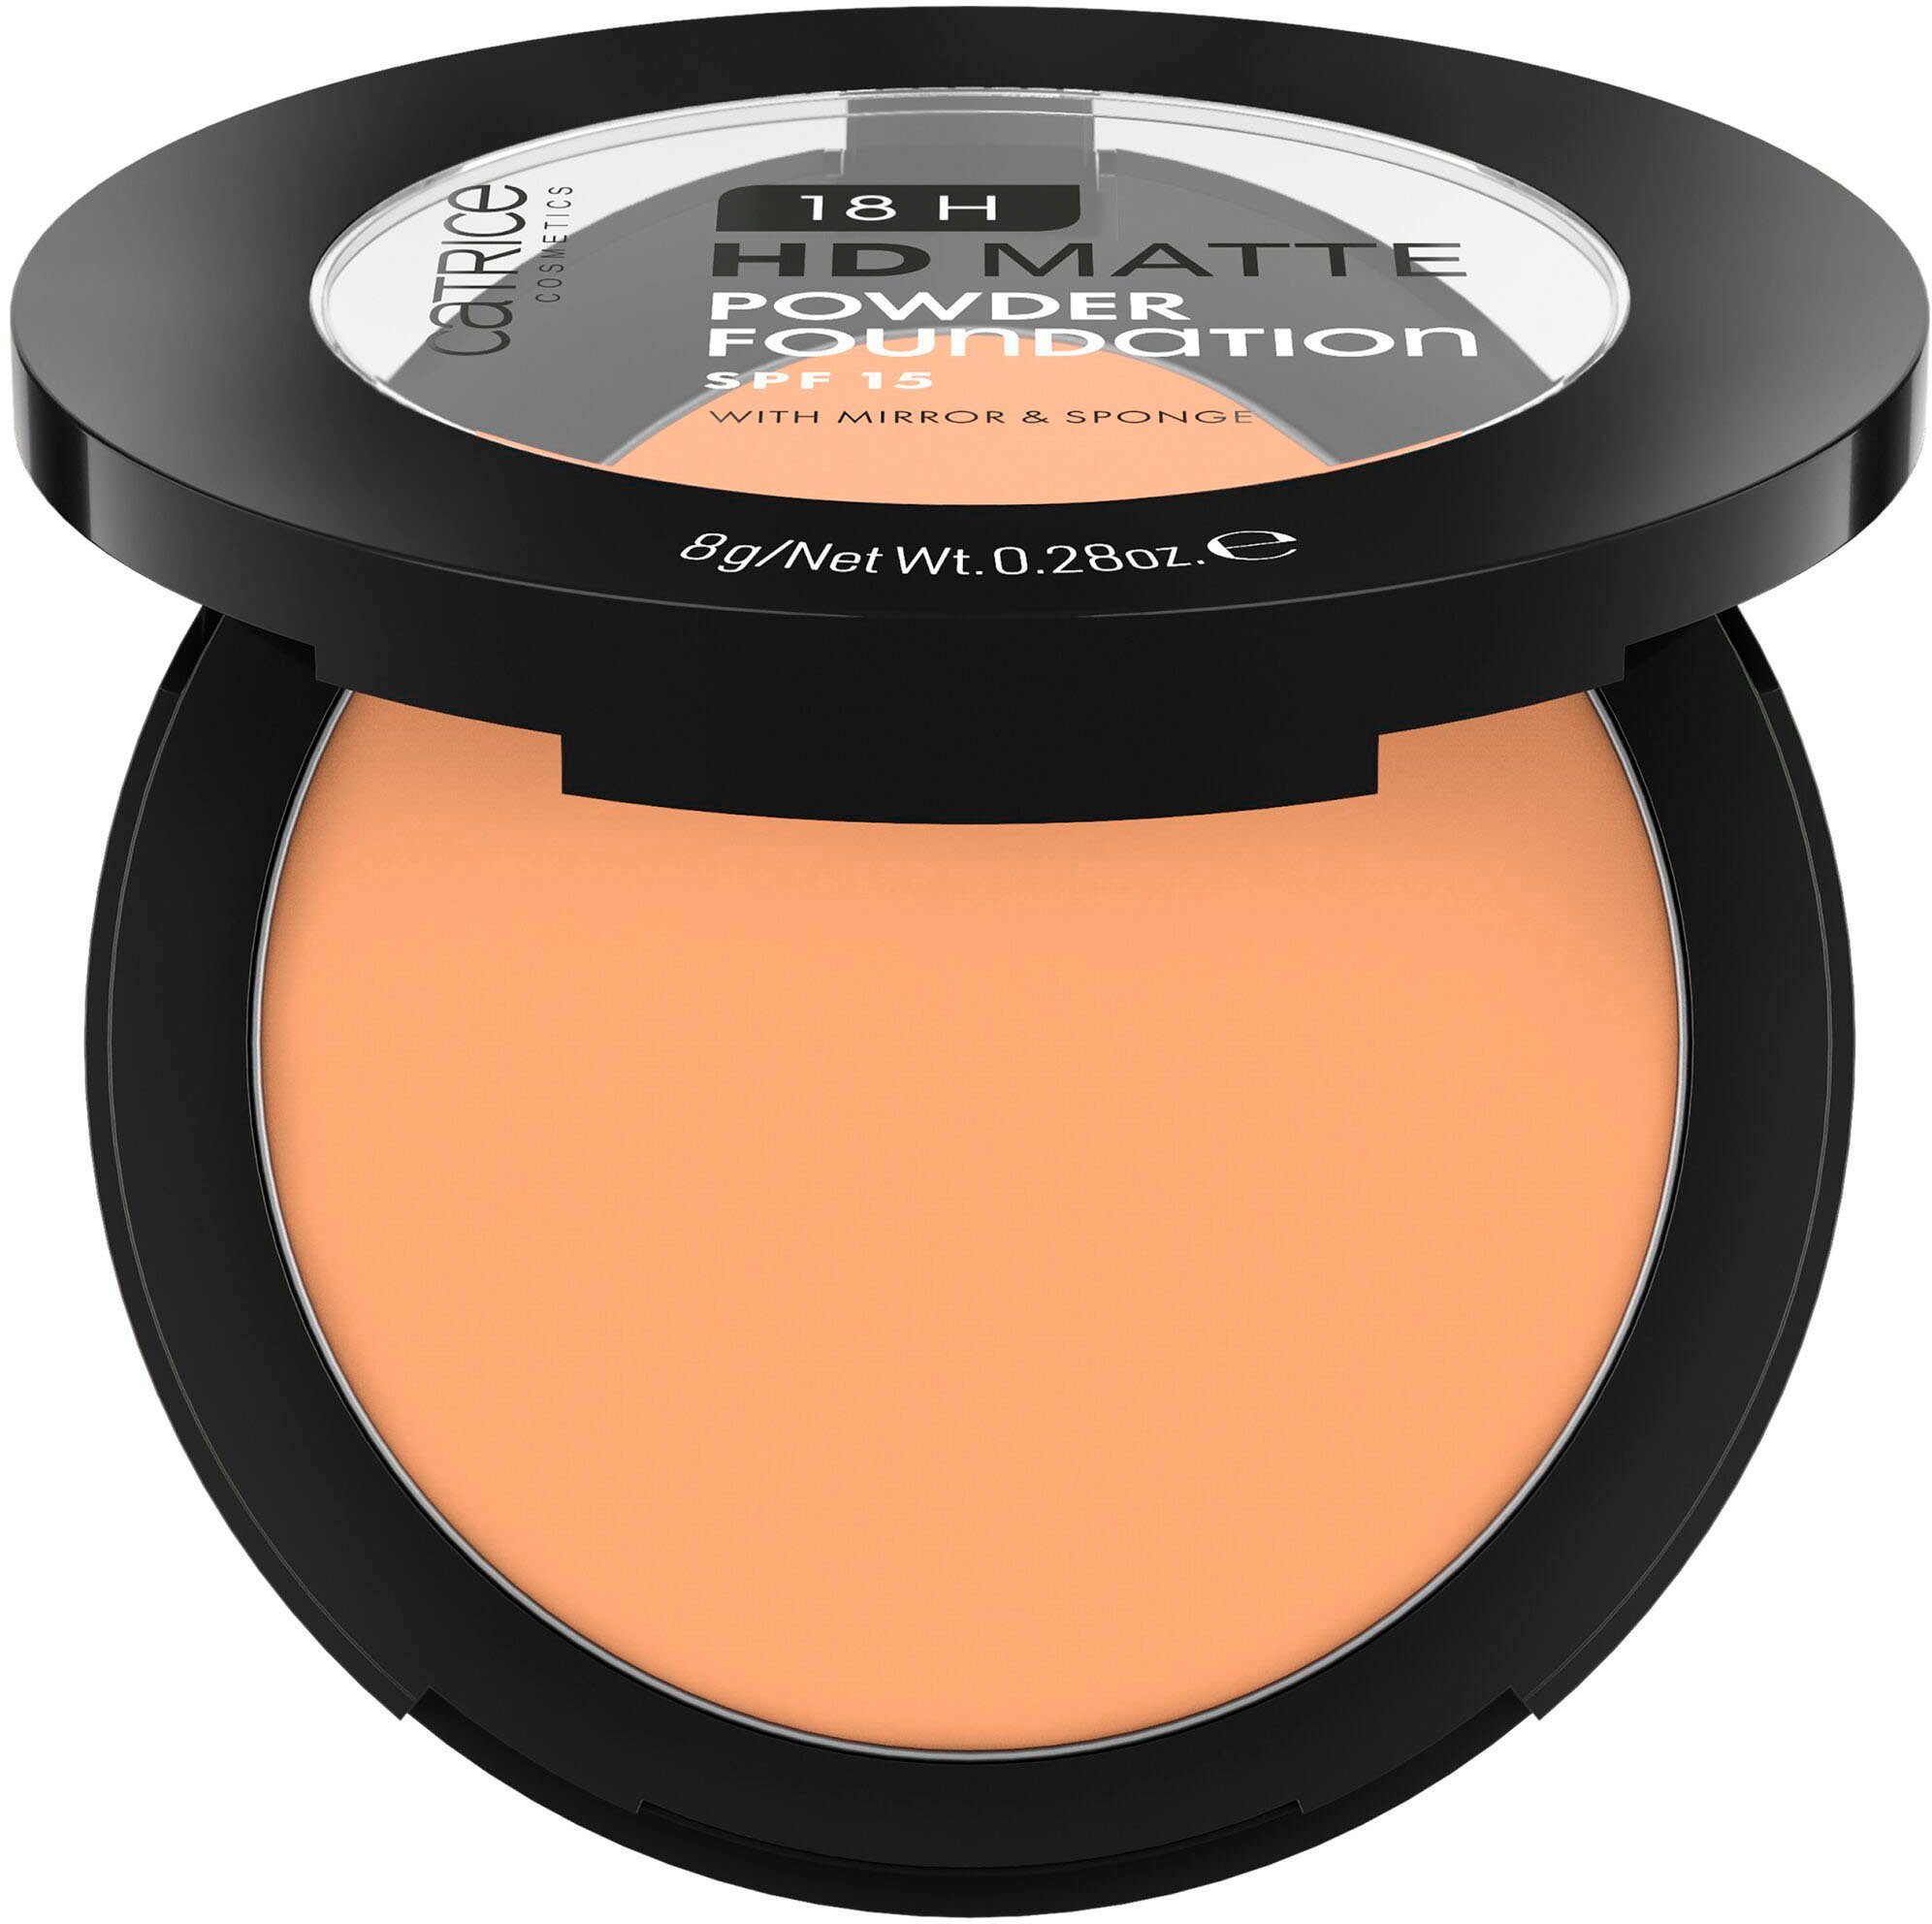 Catrice Puder 18H HD nude Powder Foundation, 045N 3-tlg. Matte